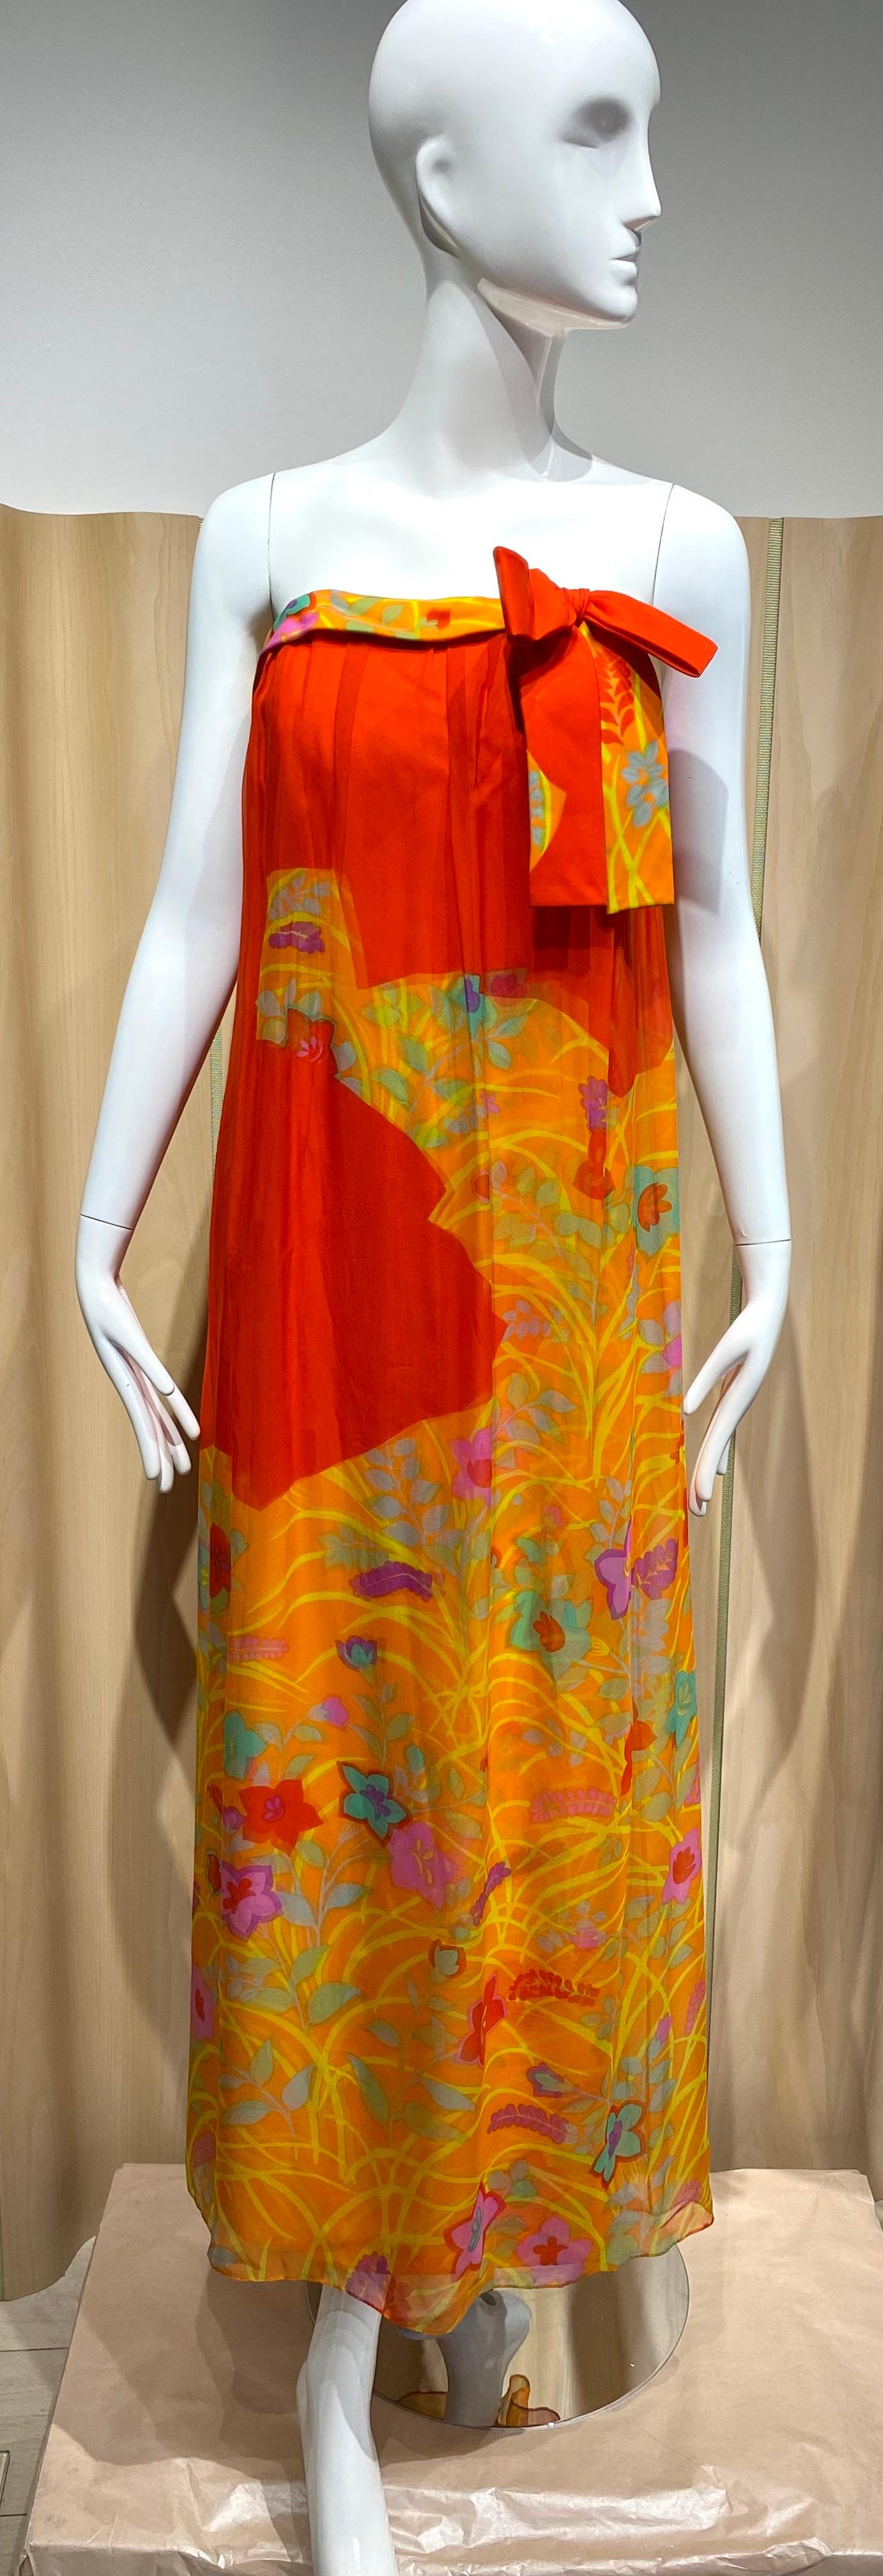 1960s Hanae Mori Silk - Begdorf Goodman Tangerine floral print silk strapless gown with bow and shawl.
Dress measurement :
Bust : 34 inches / Waist : 28 inches/ Hip 36 inches
Dress length 48 inches/ Silk outer layer is 64”

***flaws tiny pinholes